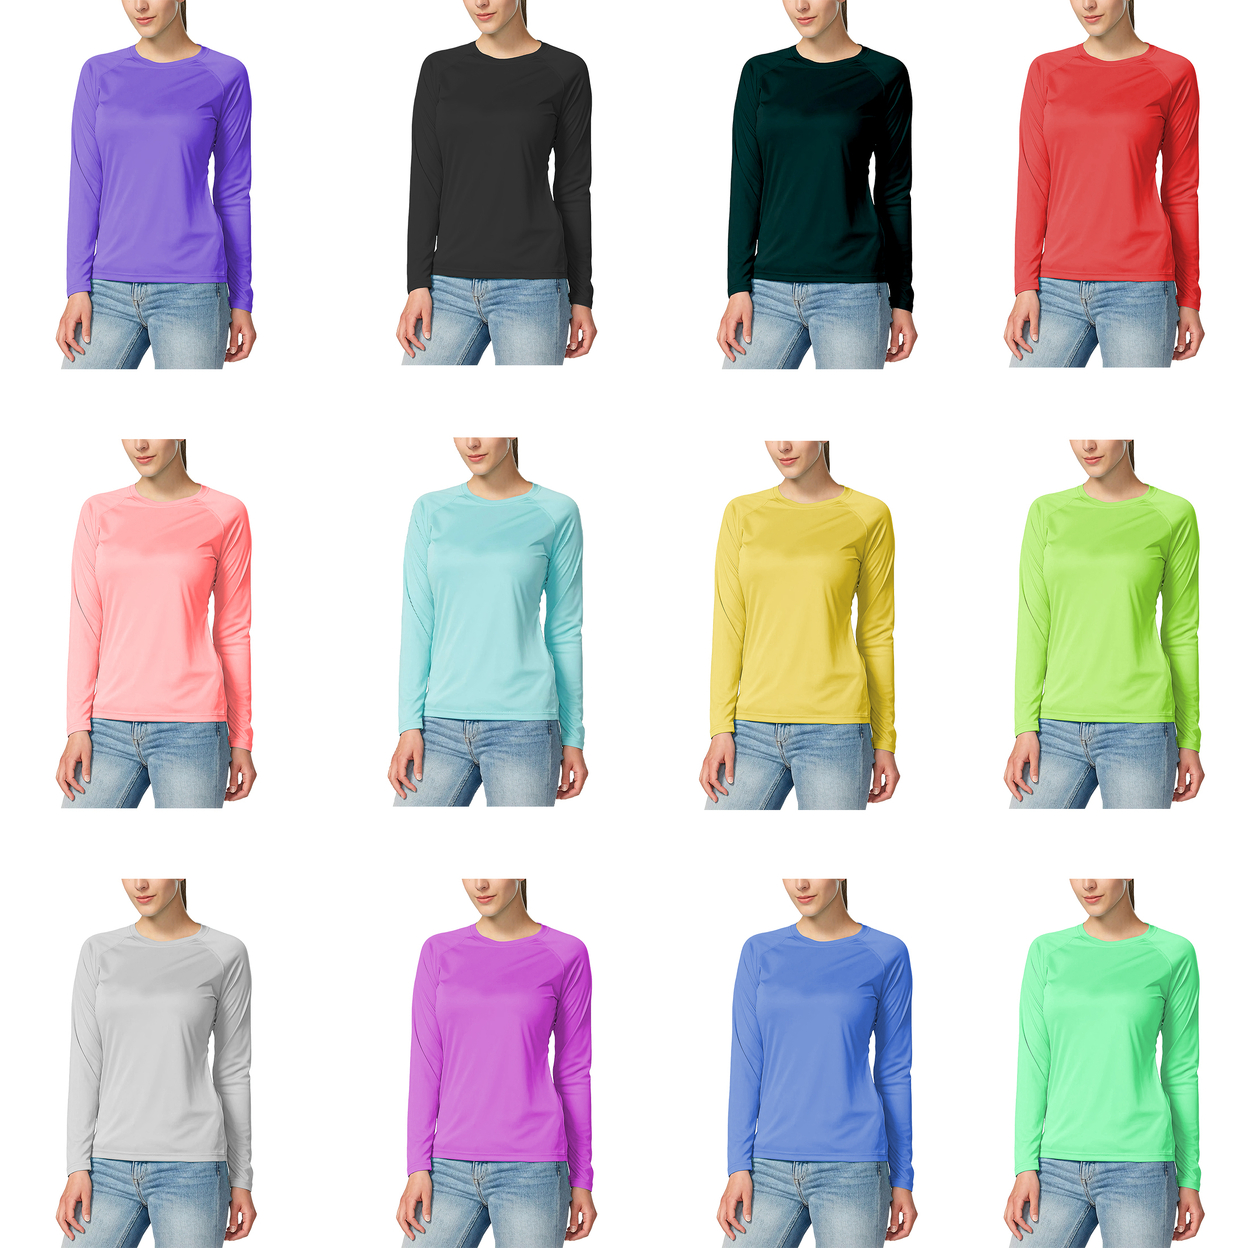 5-Pack: Women's Dri-Fit Moisture-Wicking Breathable Long Sleeve T-Shirt - Small